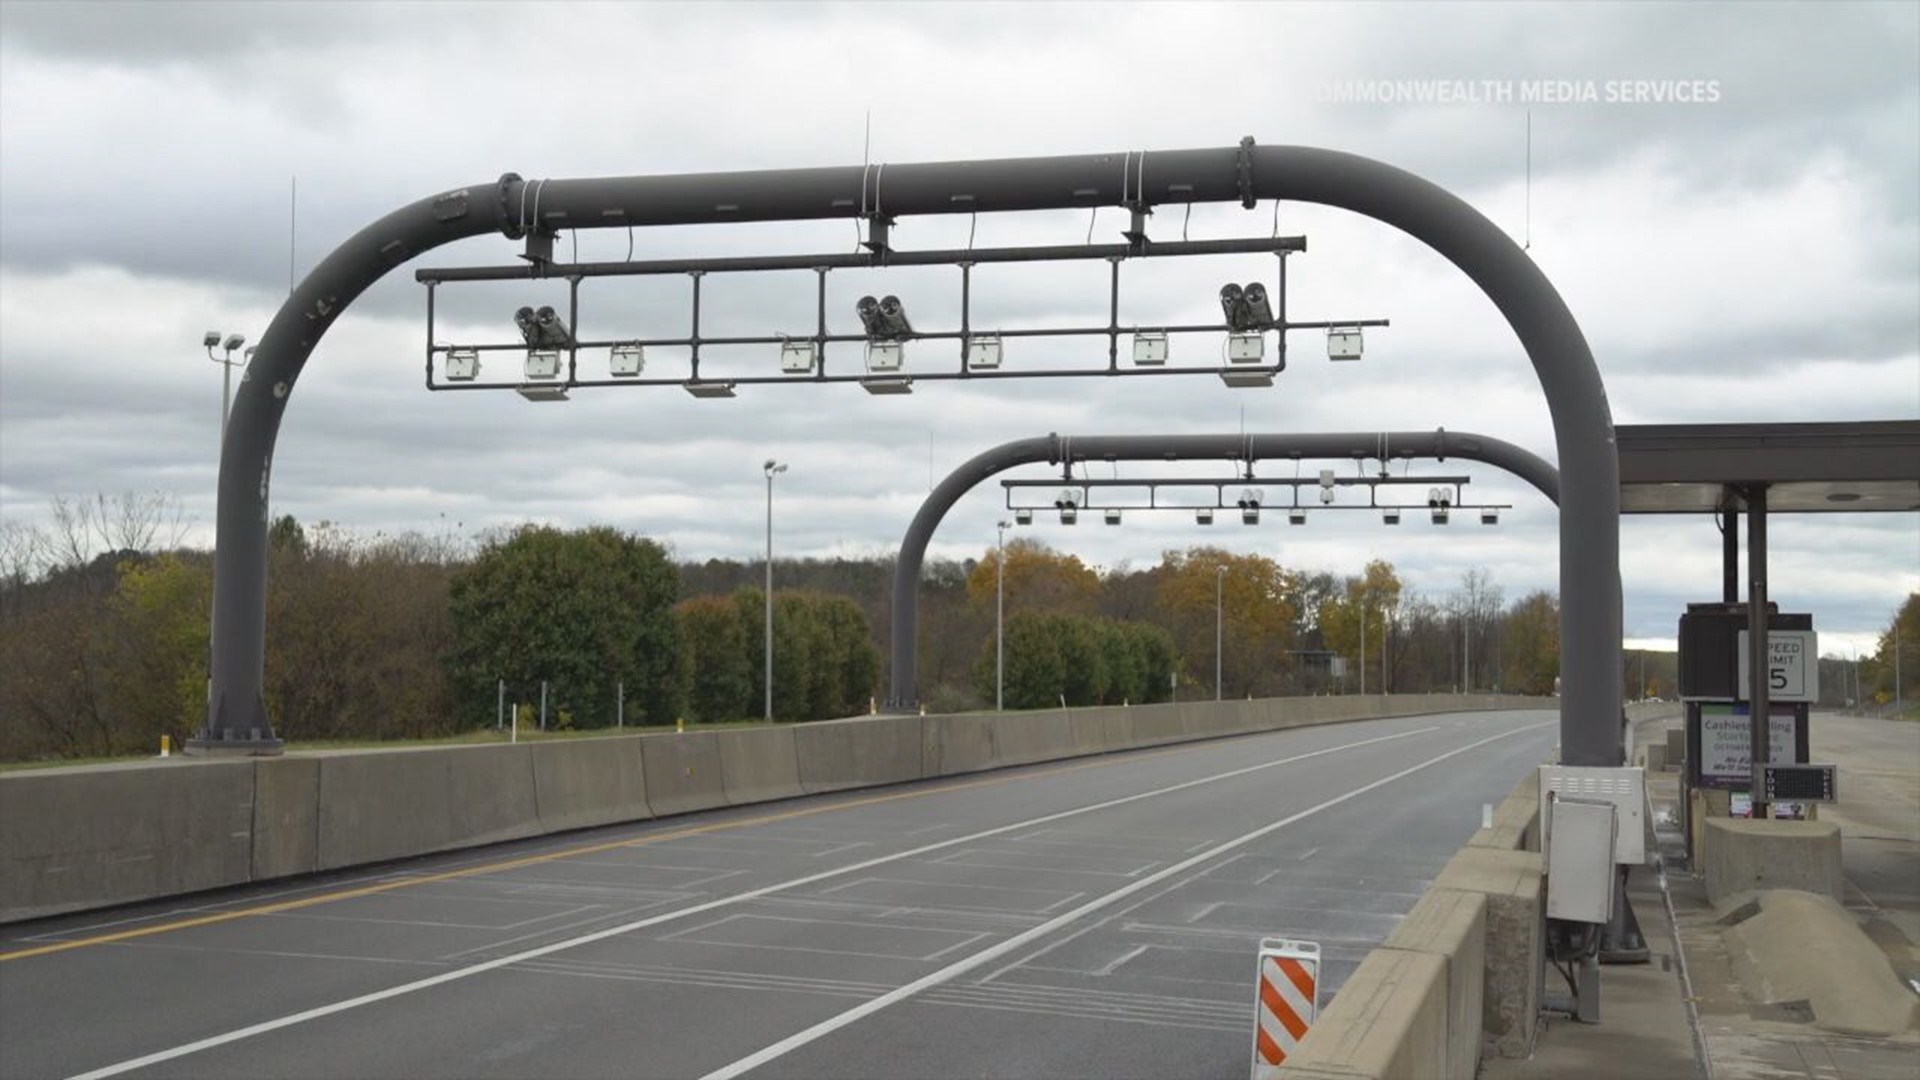 Open road tolling will eliminate toll plazas completely. Instead, drivers will be tolled as they pass through overhead structures called gantries.